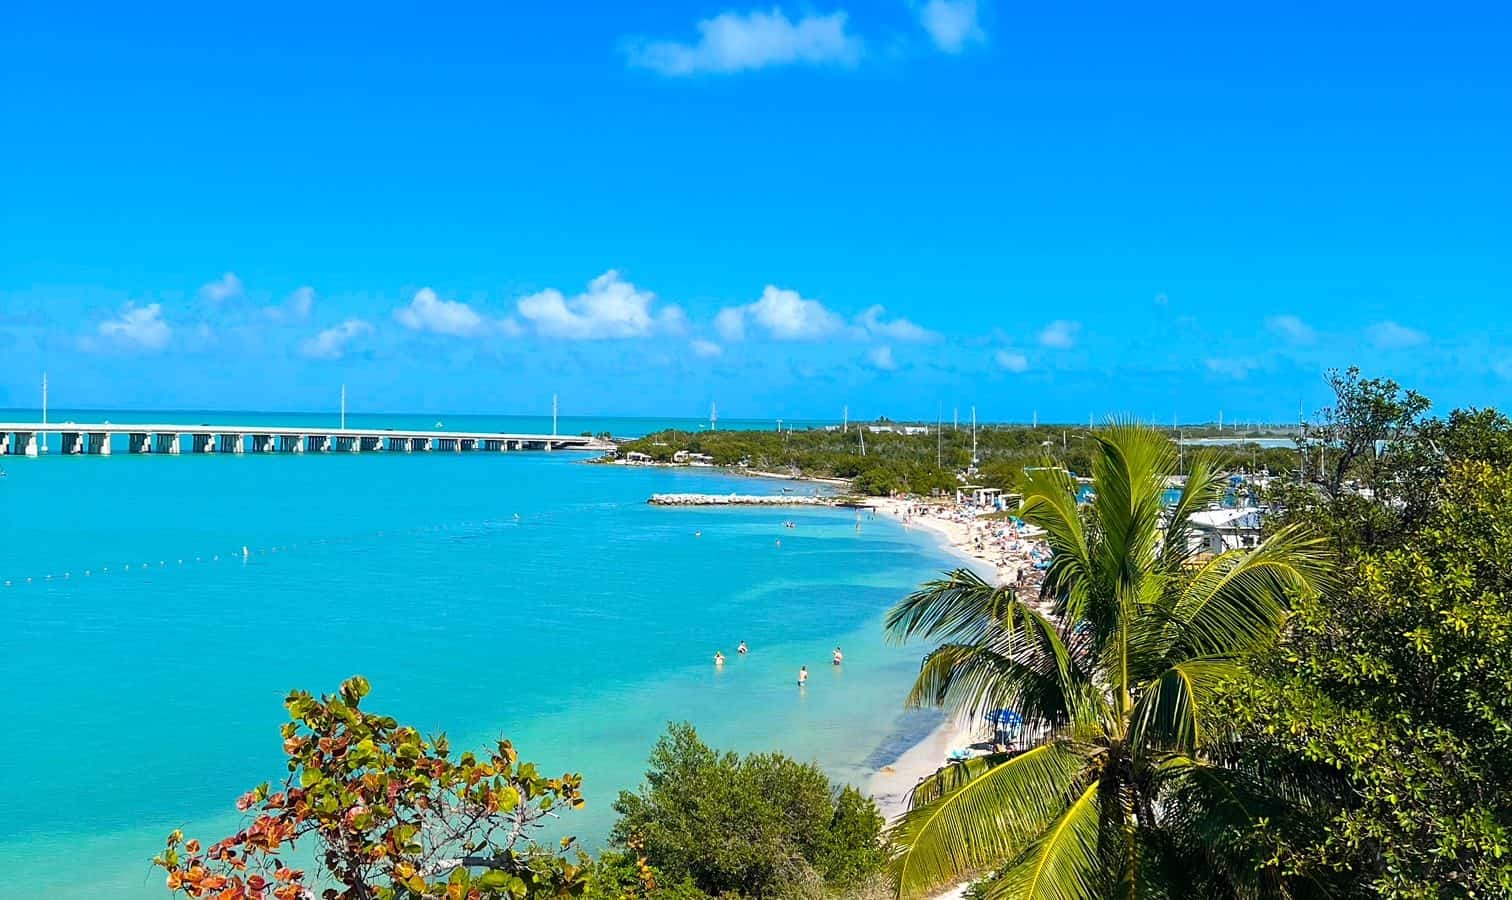 aerial view of Bahia Honda State Park, one of the best florida keys state parks!